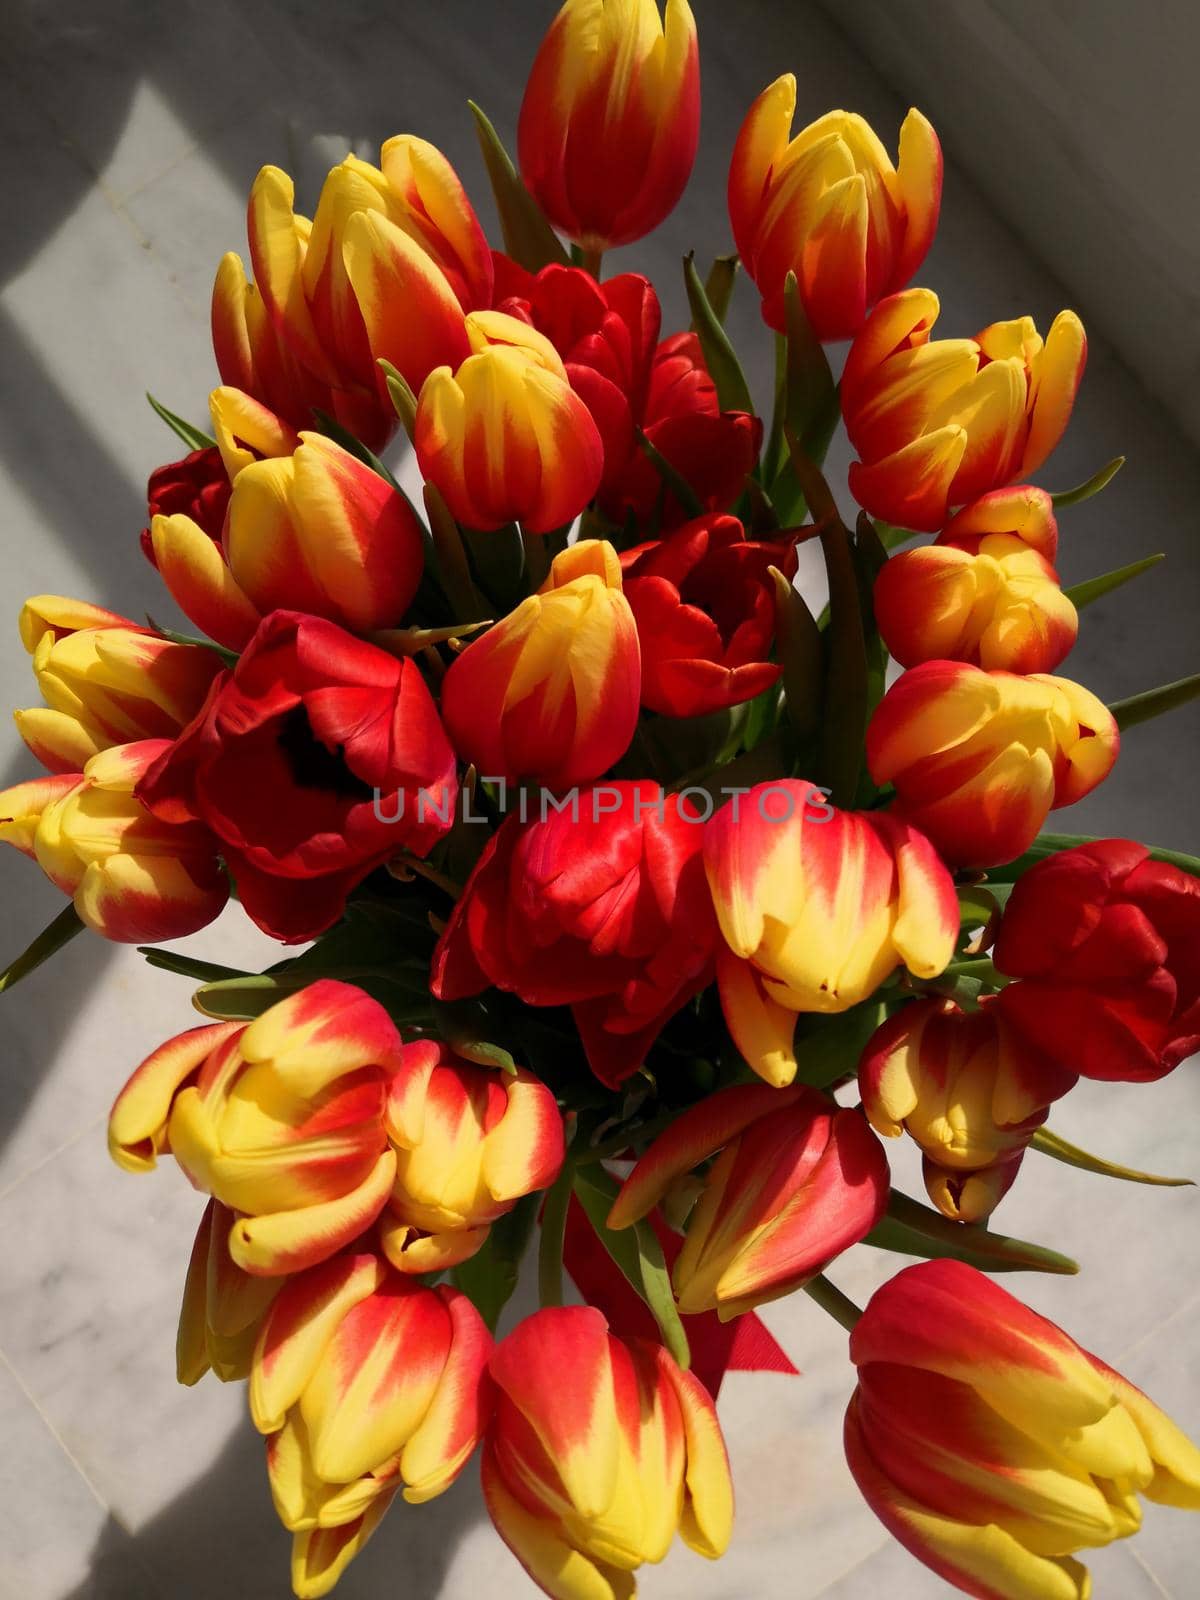 Big bouquet of red and yellow tulips. Spring tulips, big bunch by Bezdnatm